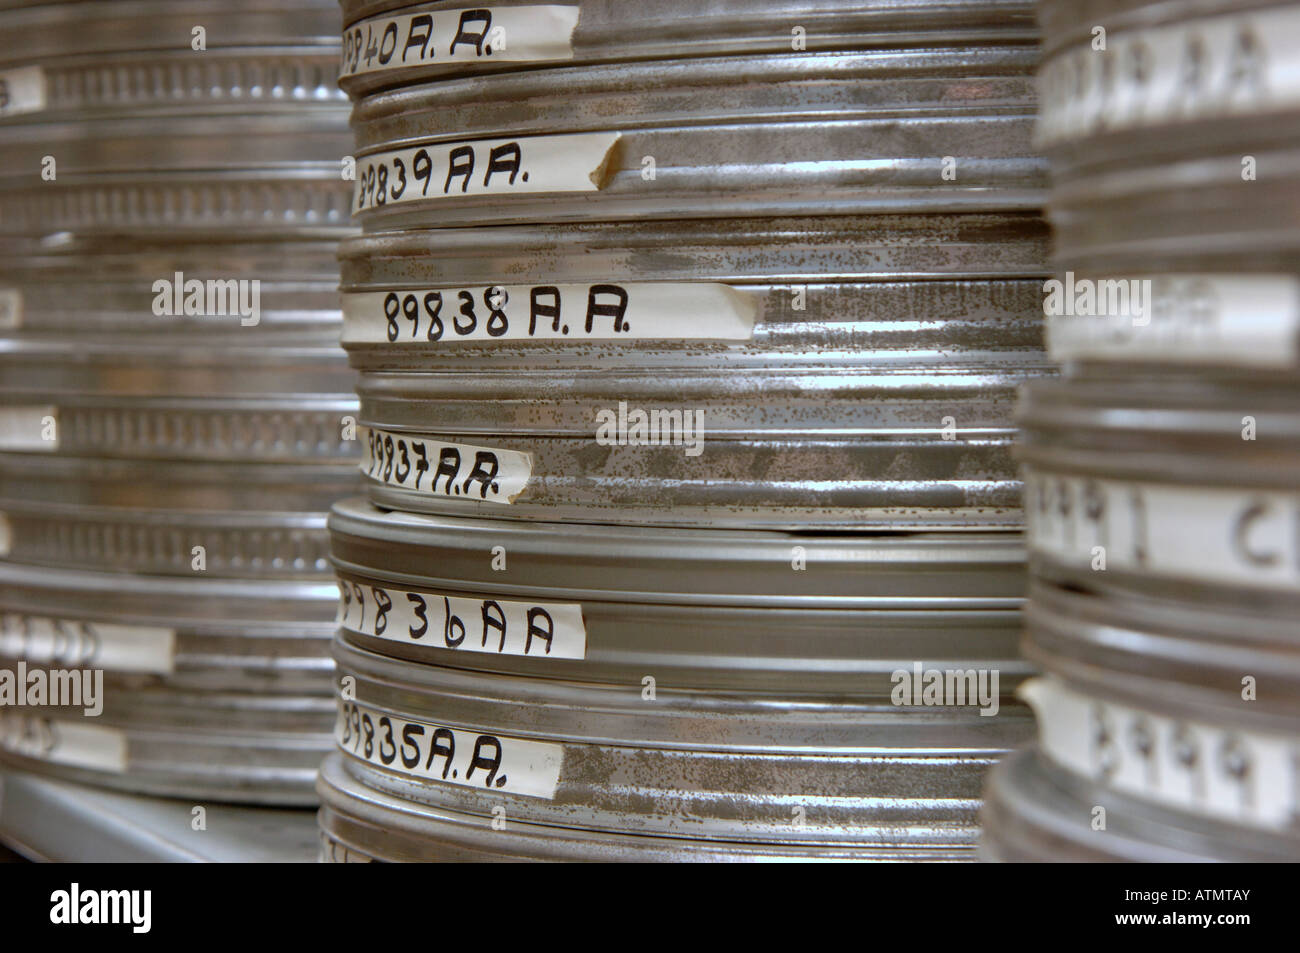 Film Reel Canisters Isolated On Grey Stock Photo 270006446